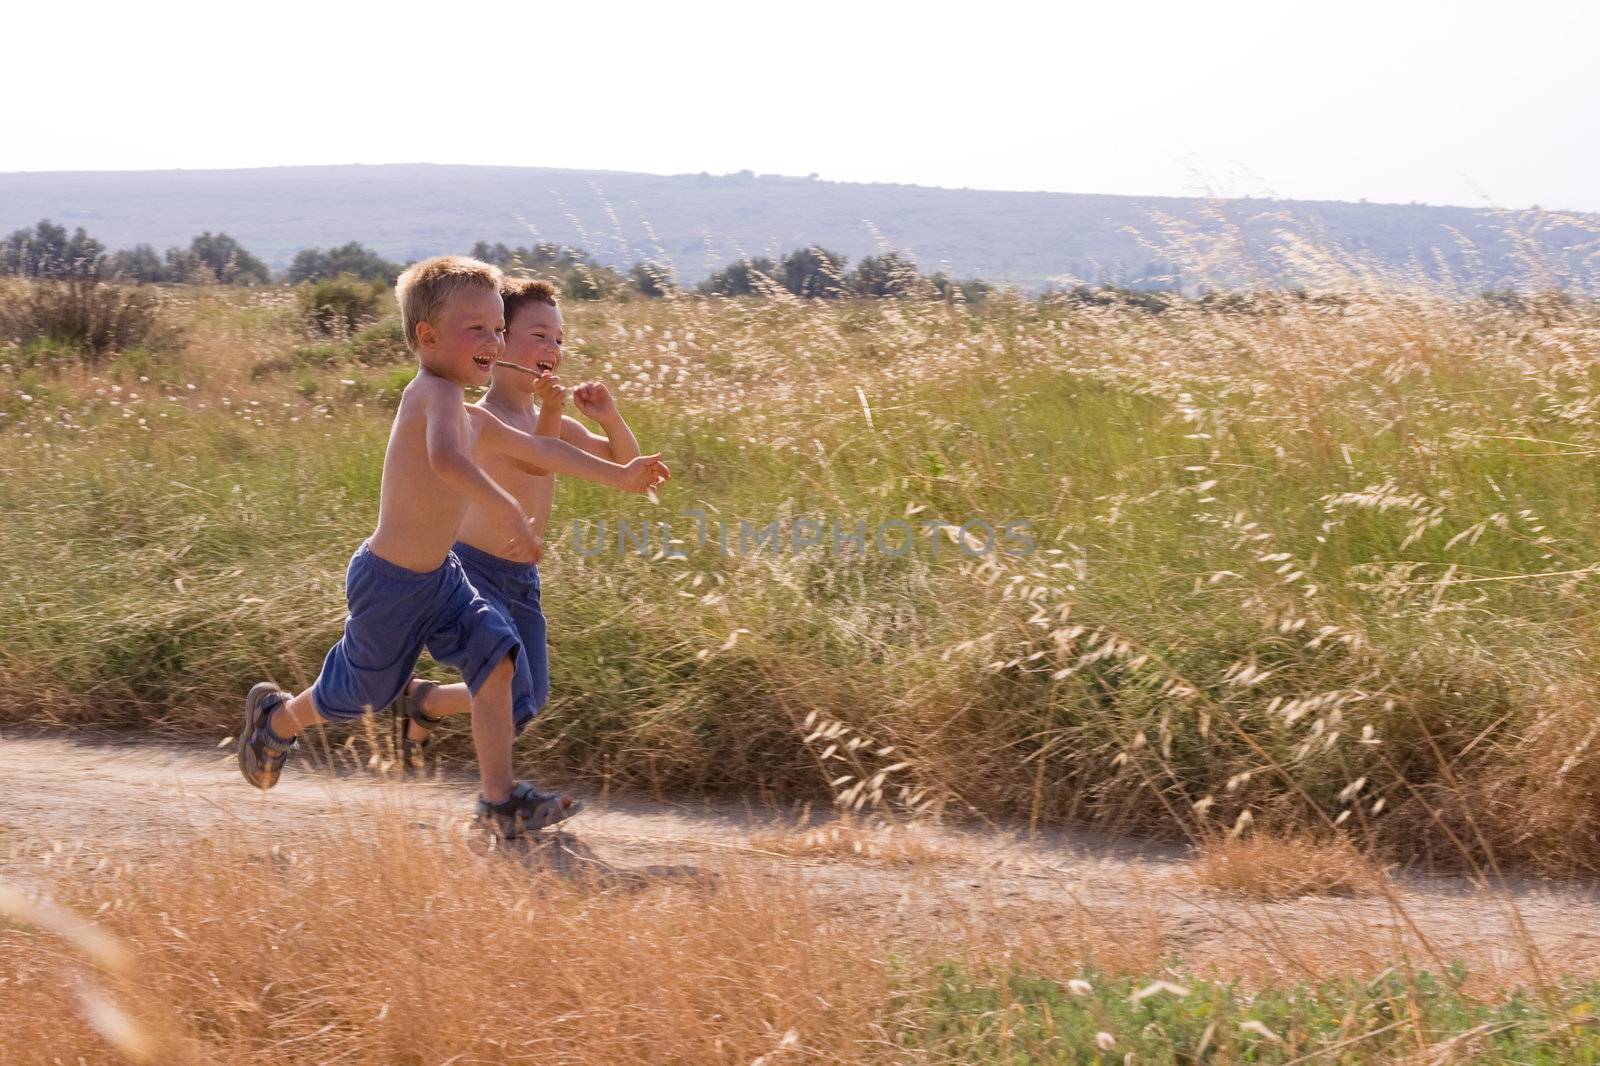 Young children running in the nature by chrisroll